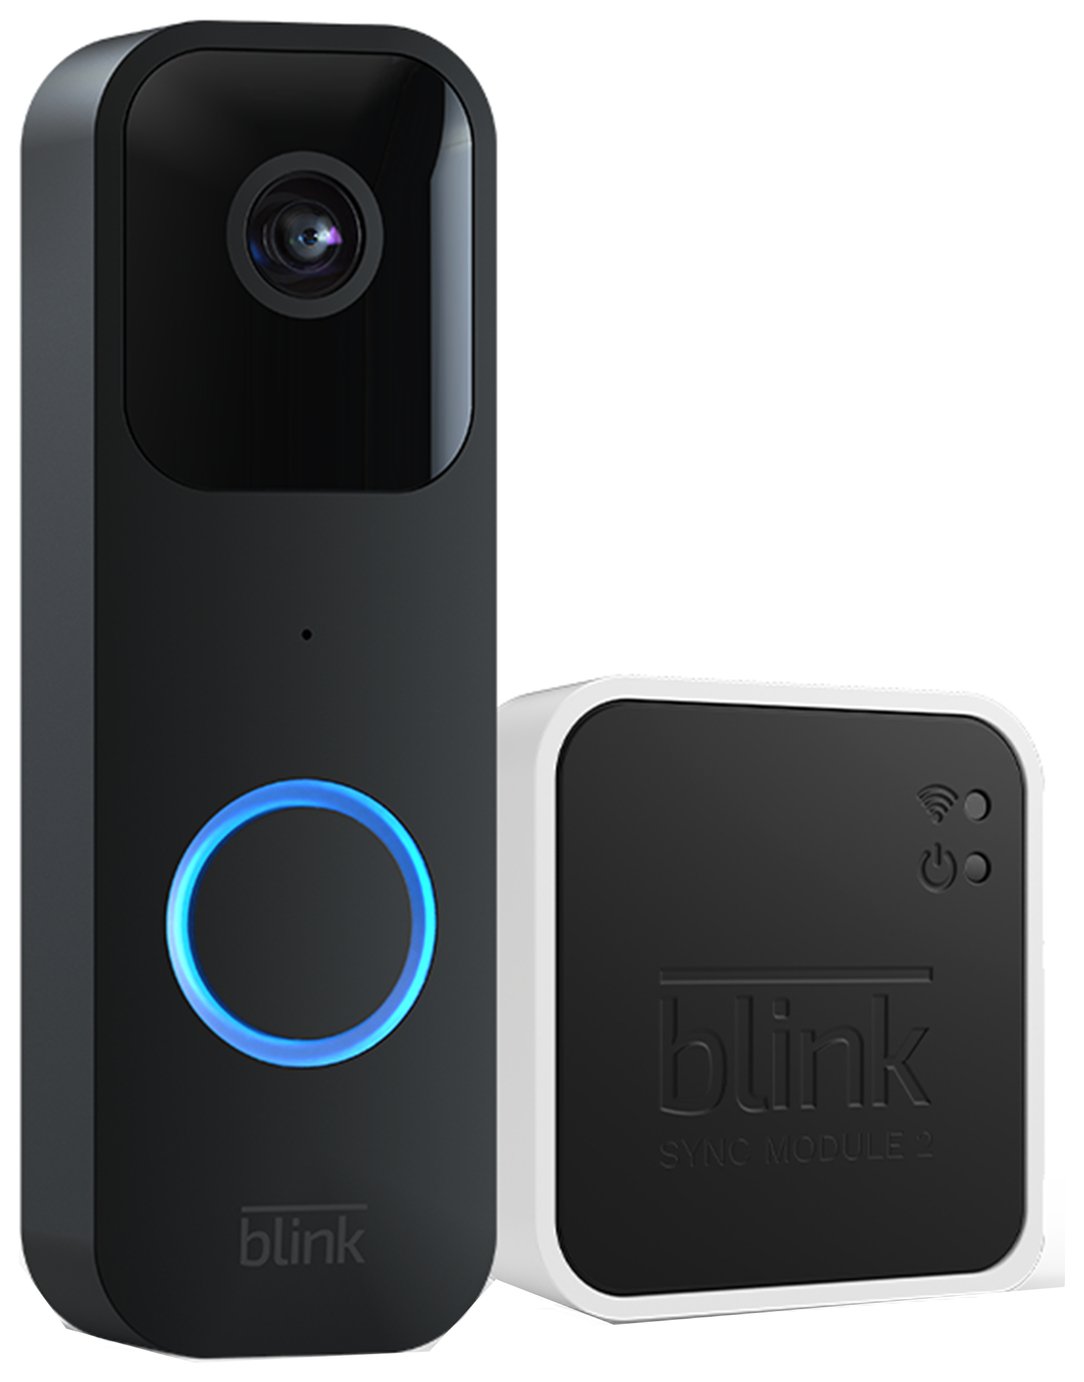 Blink Video Doorbell Wired or Battery   Sync Module - Black